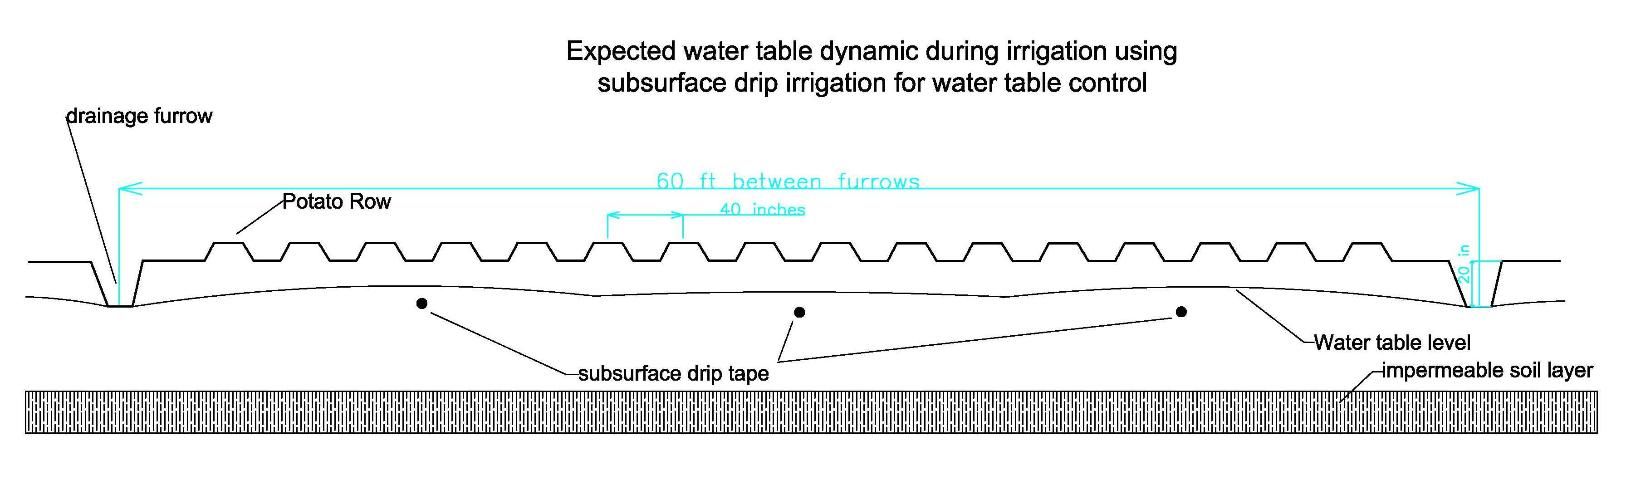 Figure 5. Expected water table level with subsurface drip irrigation for water table management.